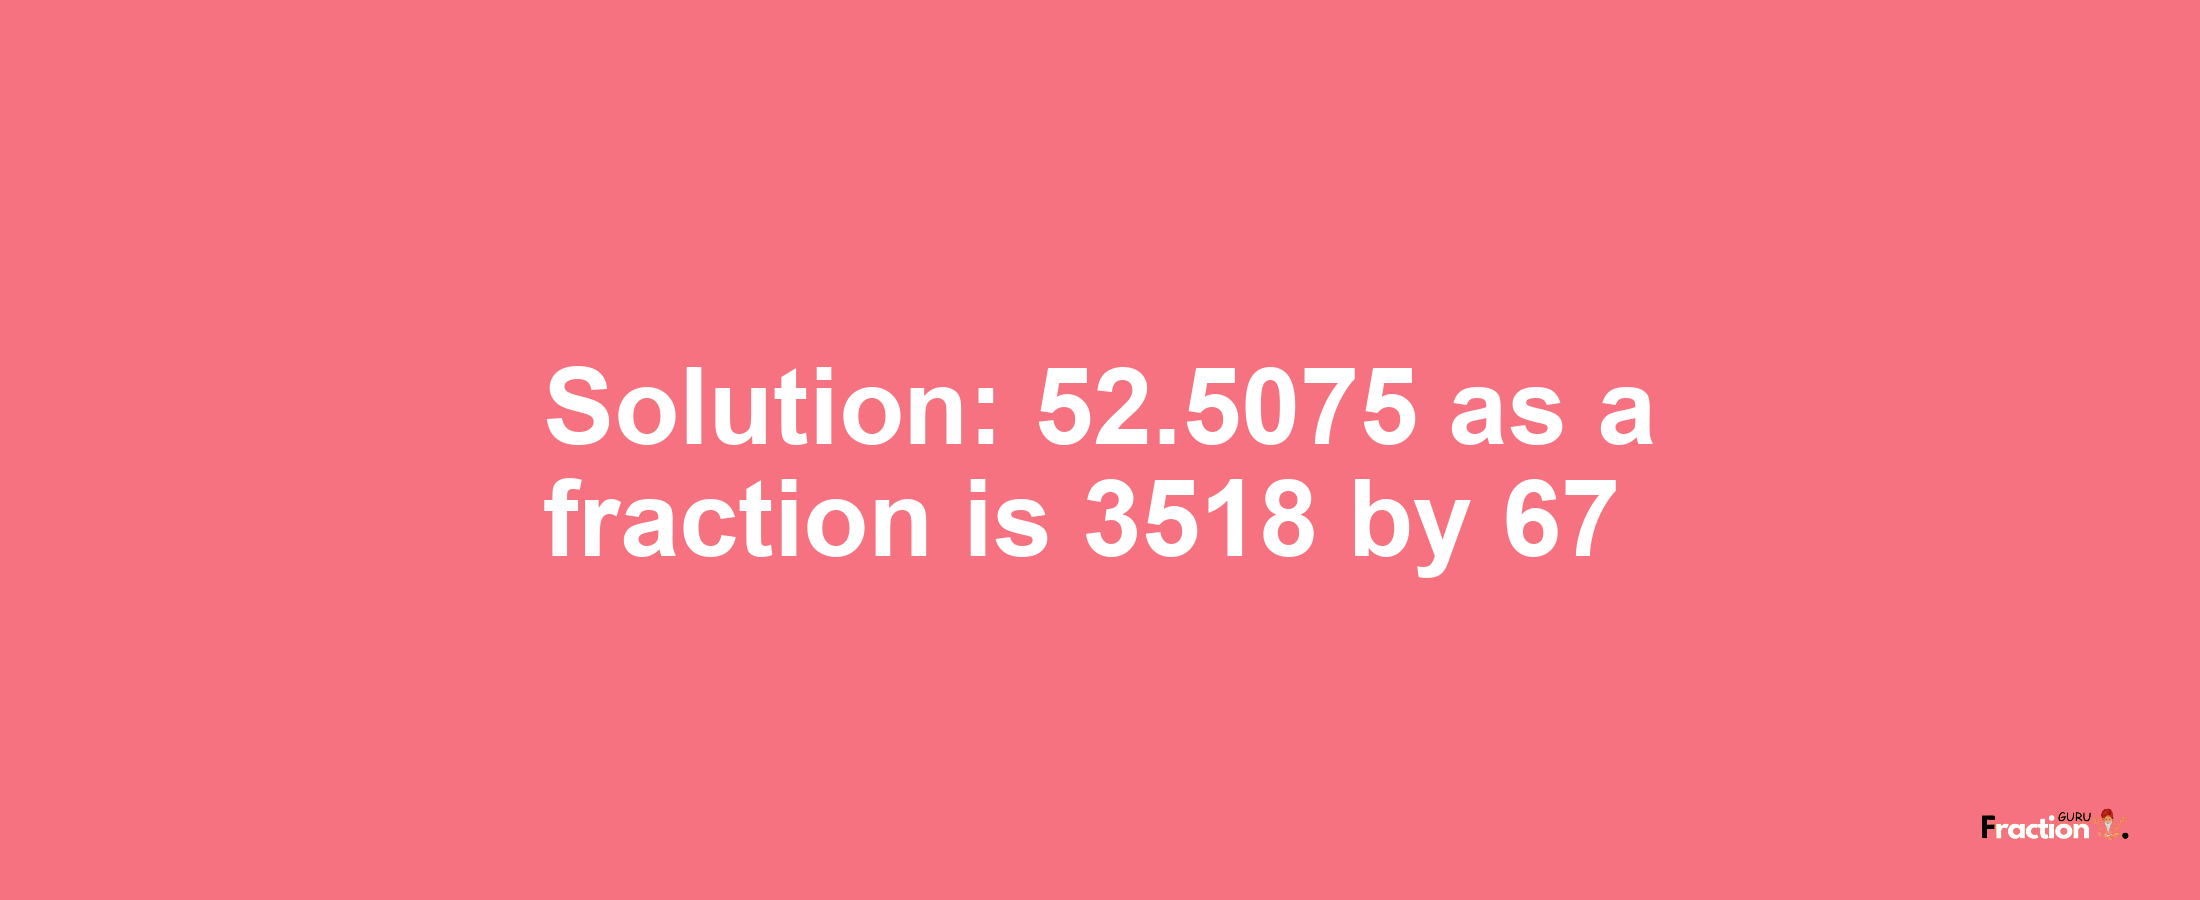 Solution:52.5075 as a fraction is 3518/67